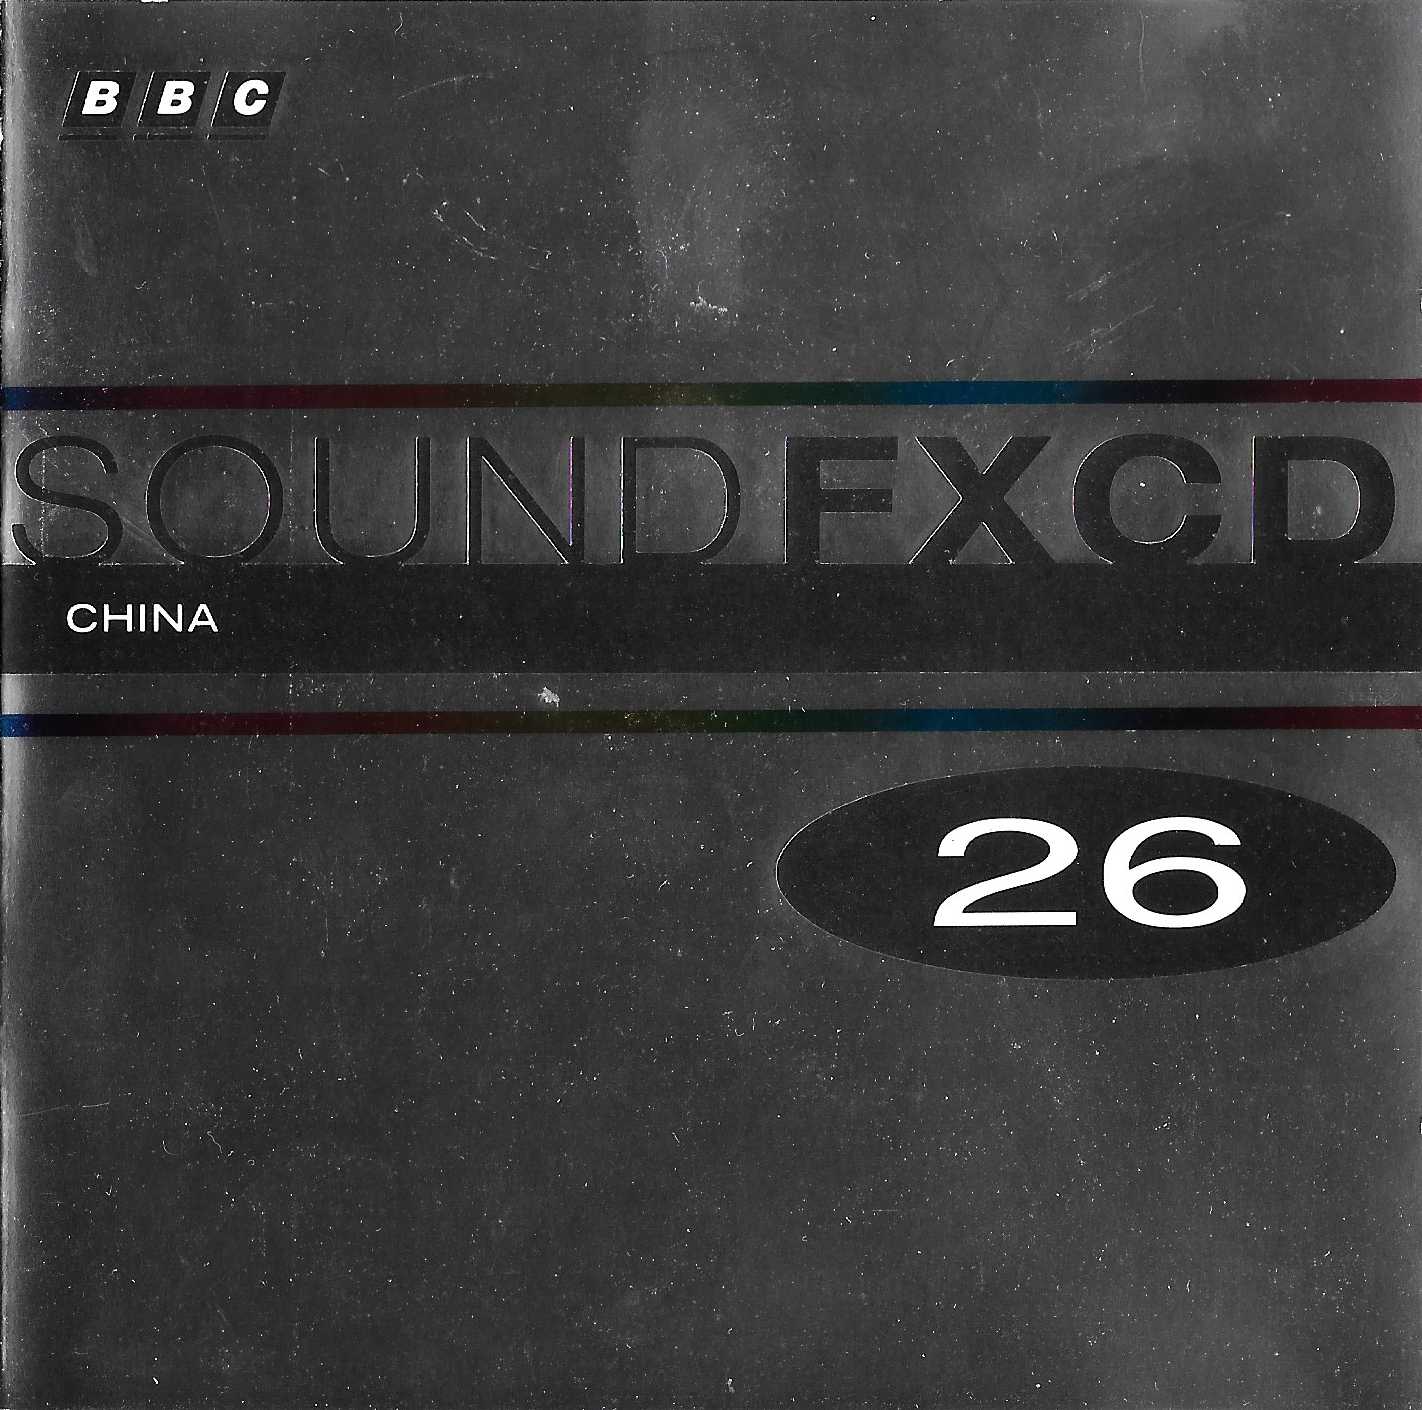 Picture of BBCCD SFX026 China by artist Various from the BBC records and Tapes library